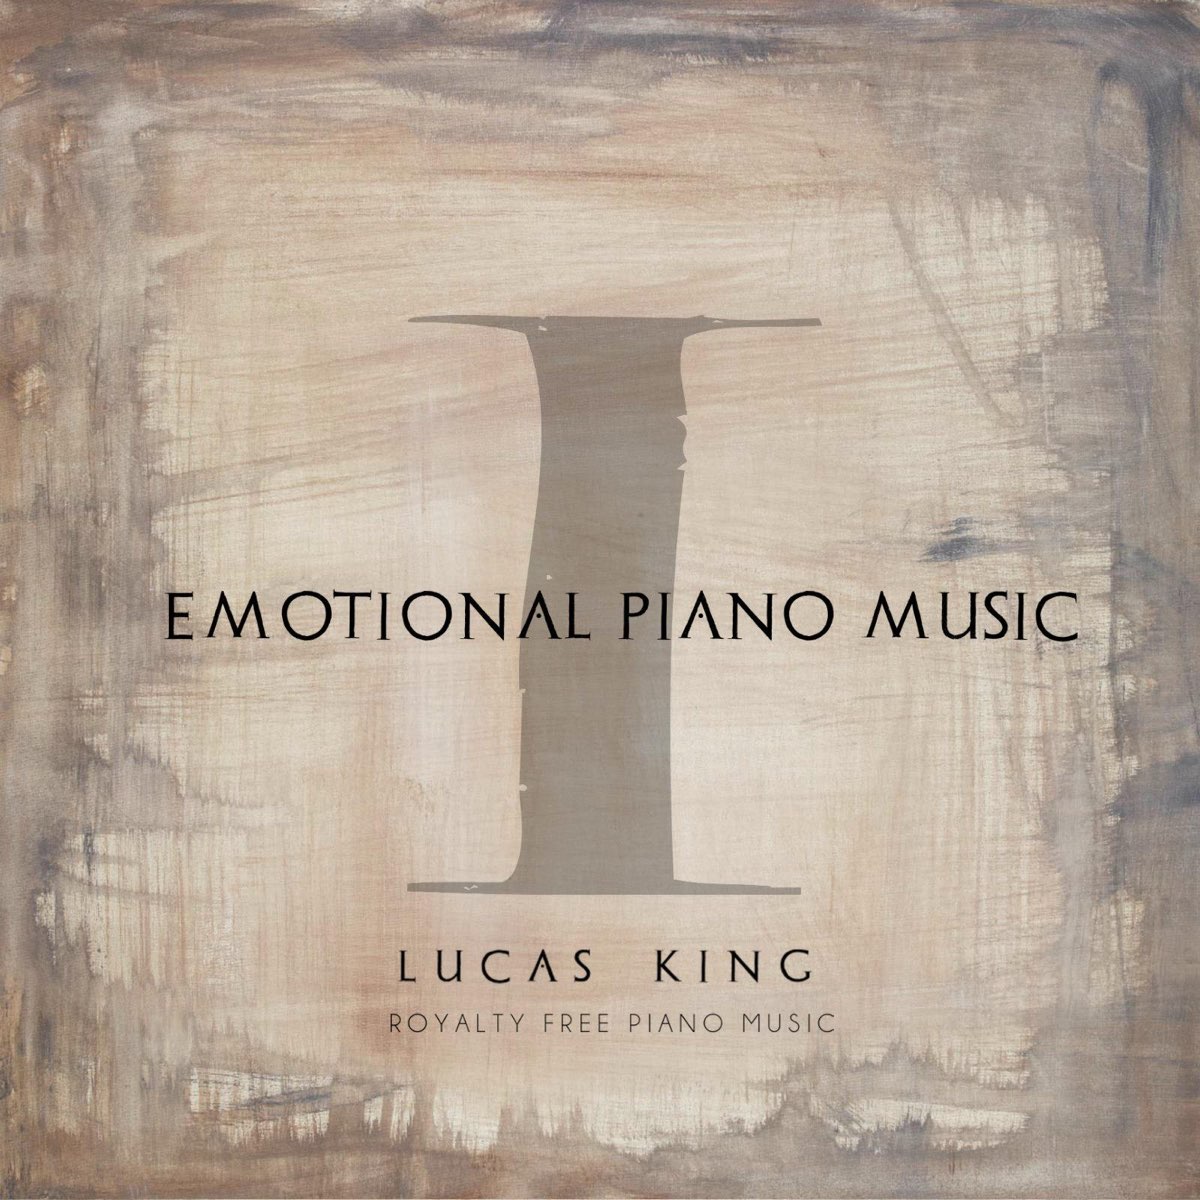 Emotional Piano Music I, Royalty Free Piano Music by Lucas King on iTunes